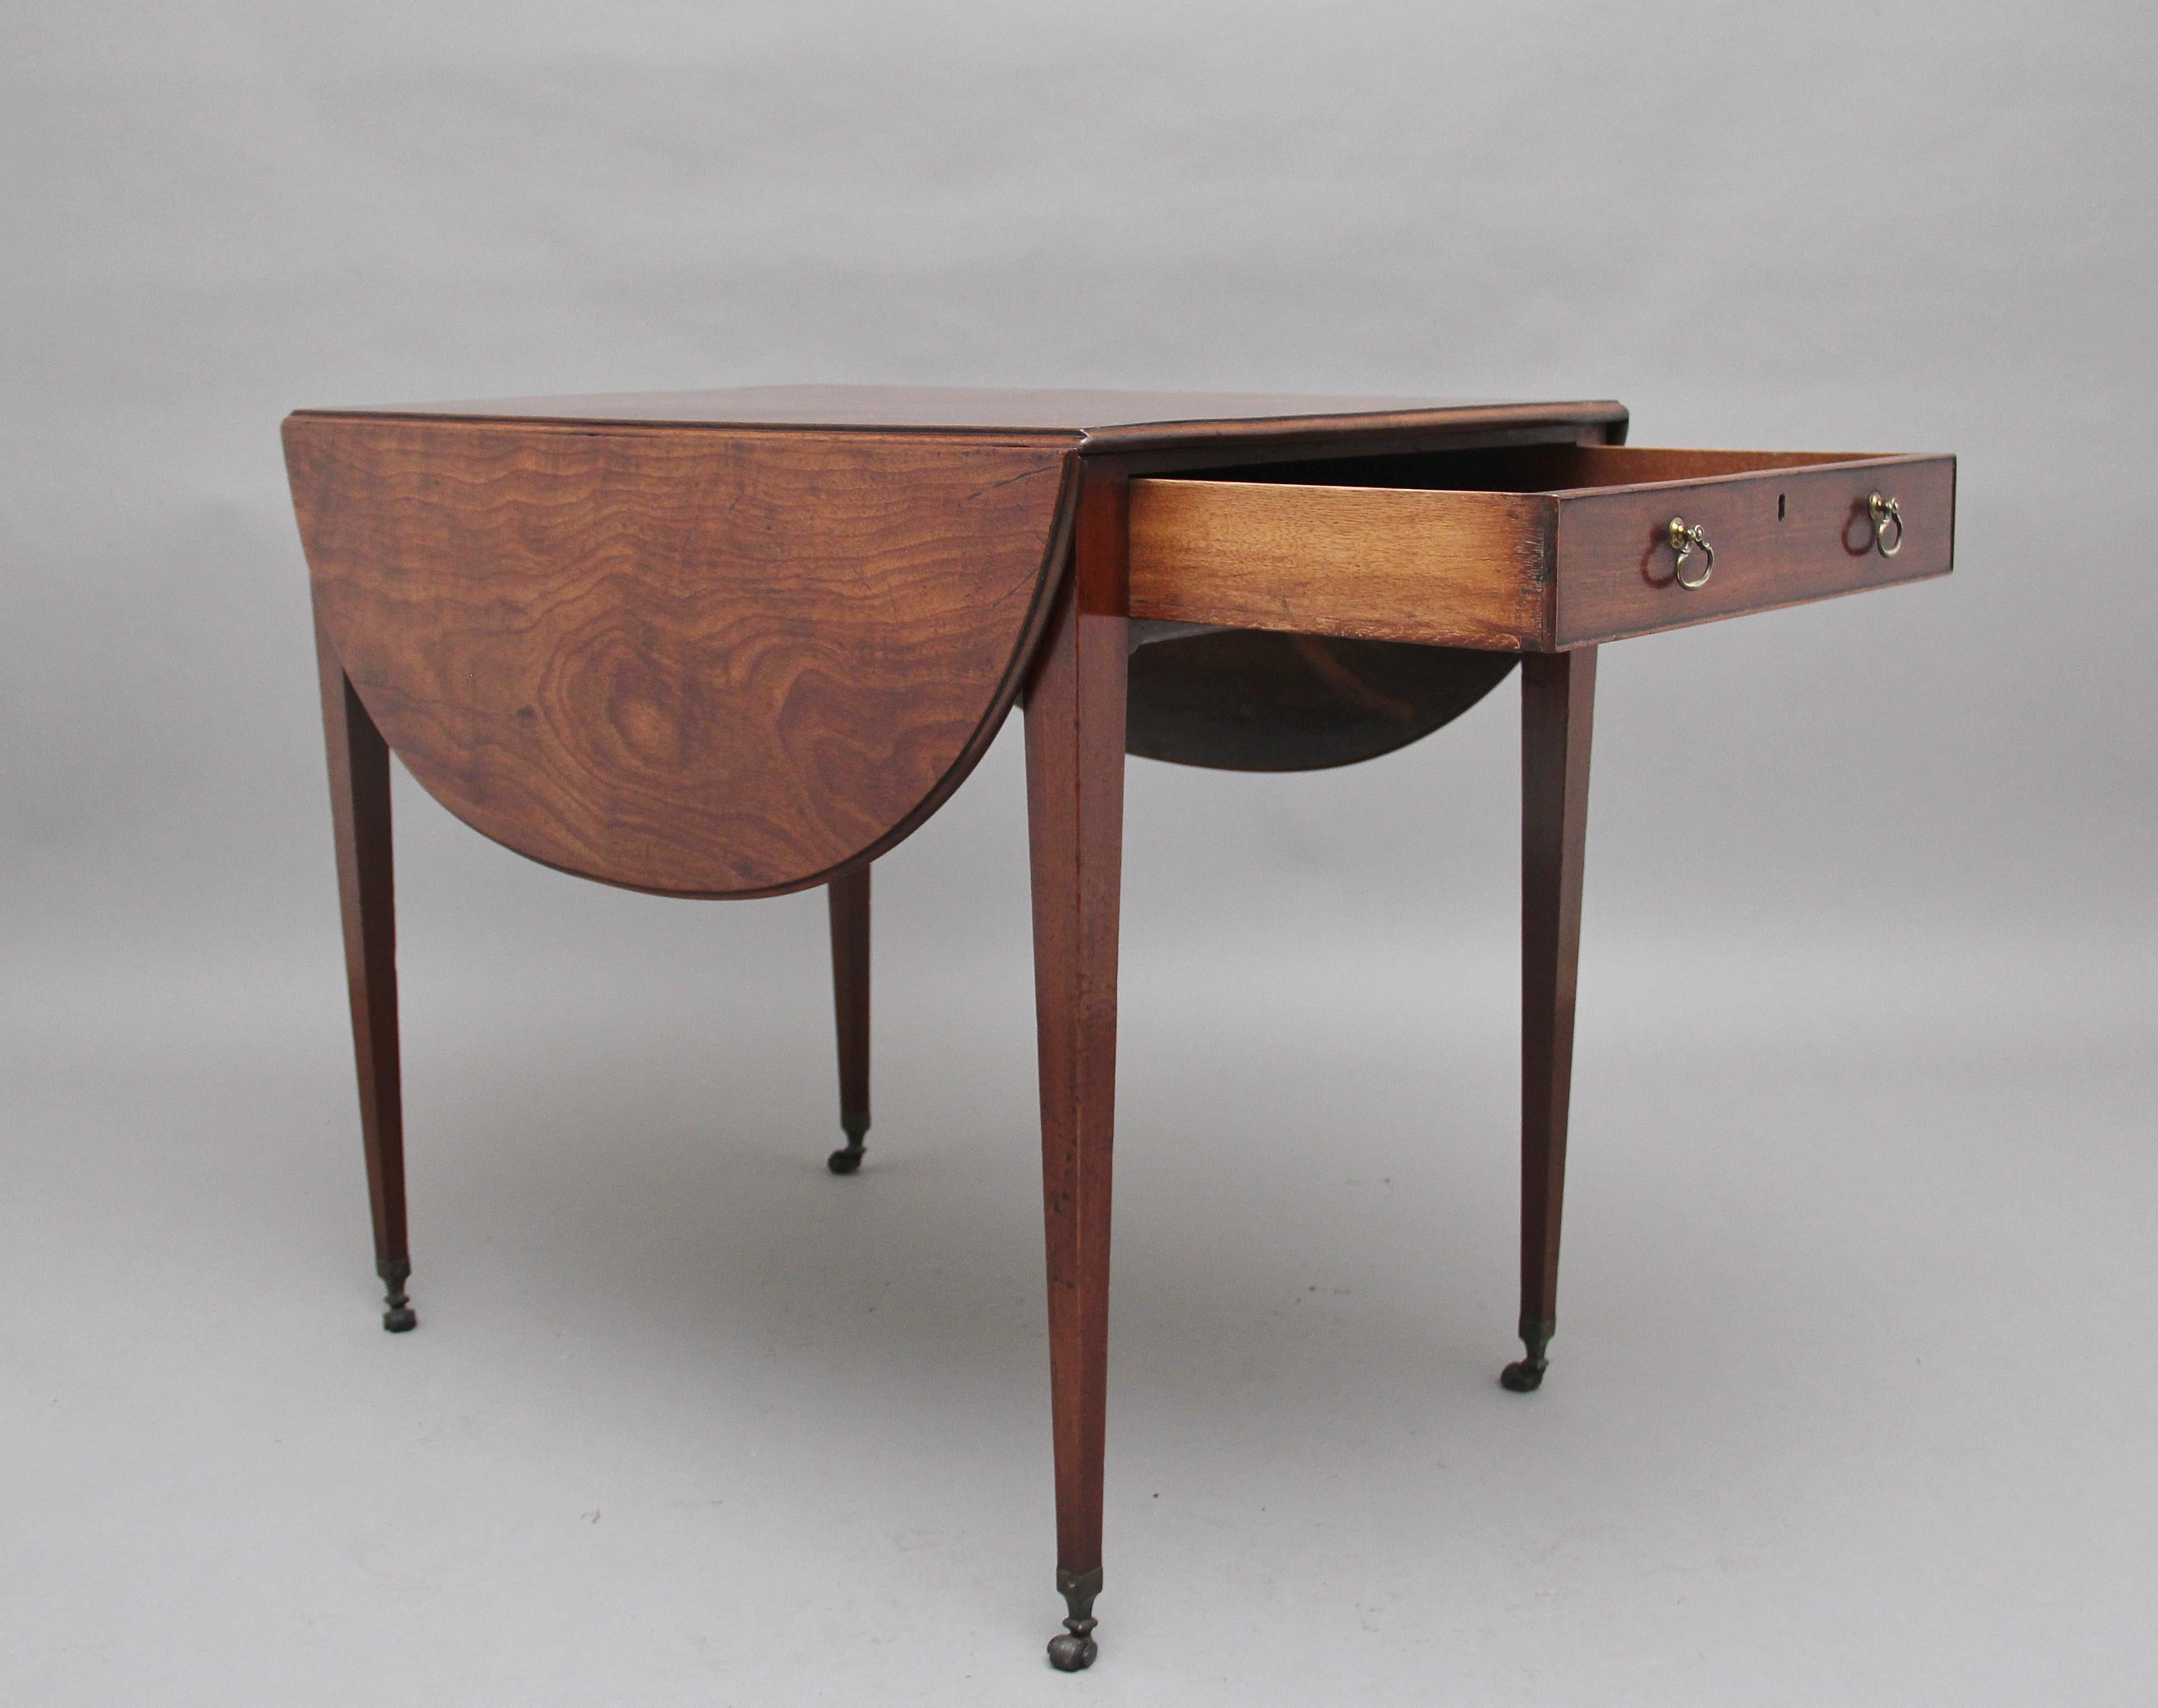 A fabulous quality early 19th century mahogany oval Pembroke table, having a wonderful solid figured top with a moulded edge, single oak lined drawer at one end with brass ring handles, the other end having a faux drawer, supported on square